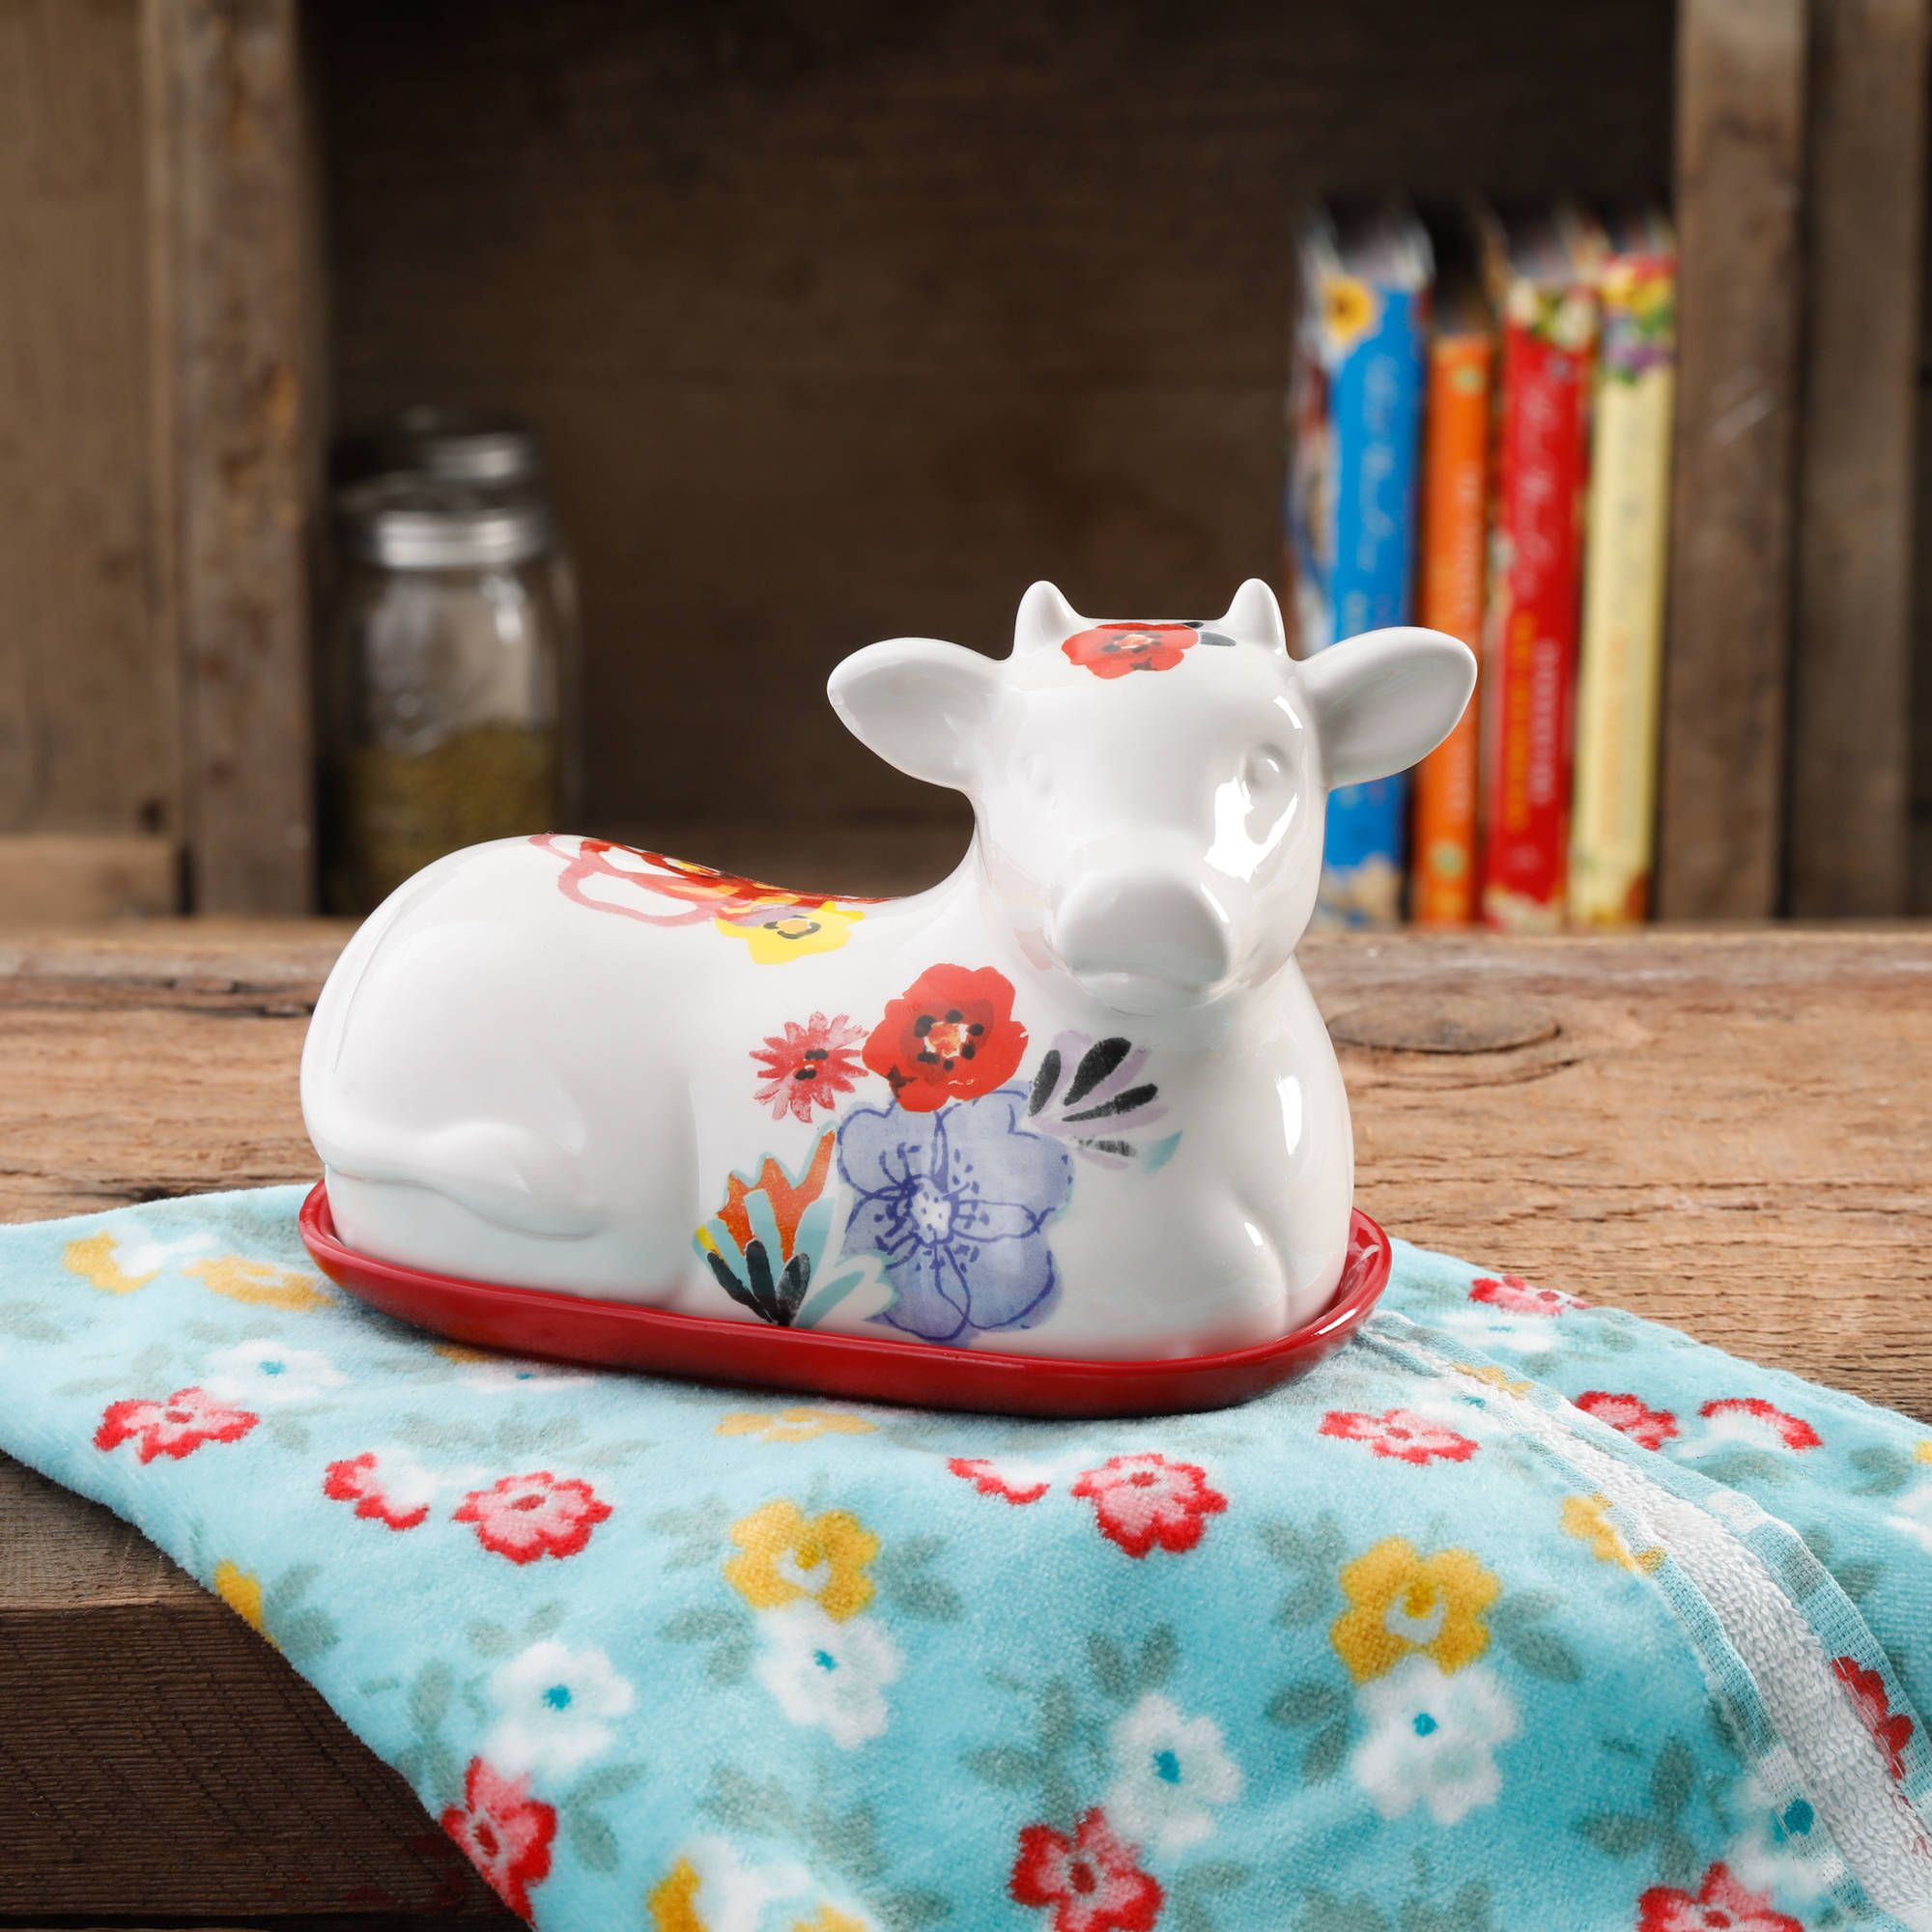 The Pioneer Woman Cow Butter Dish